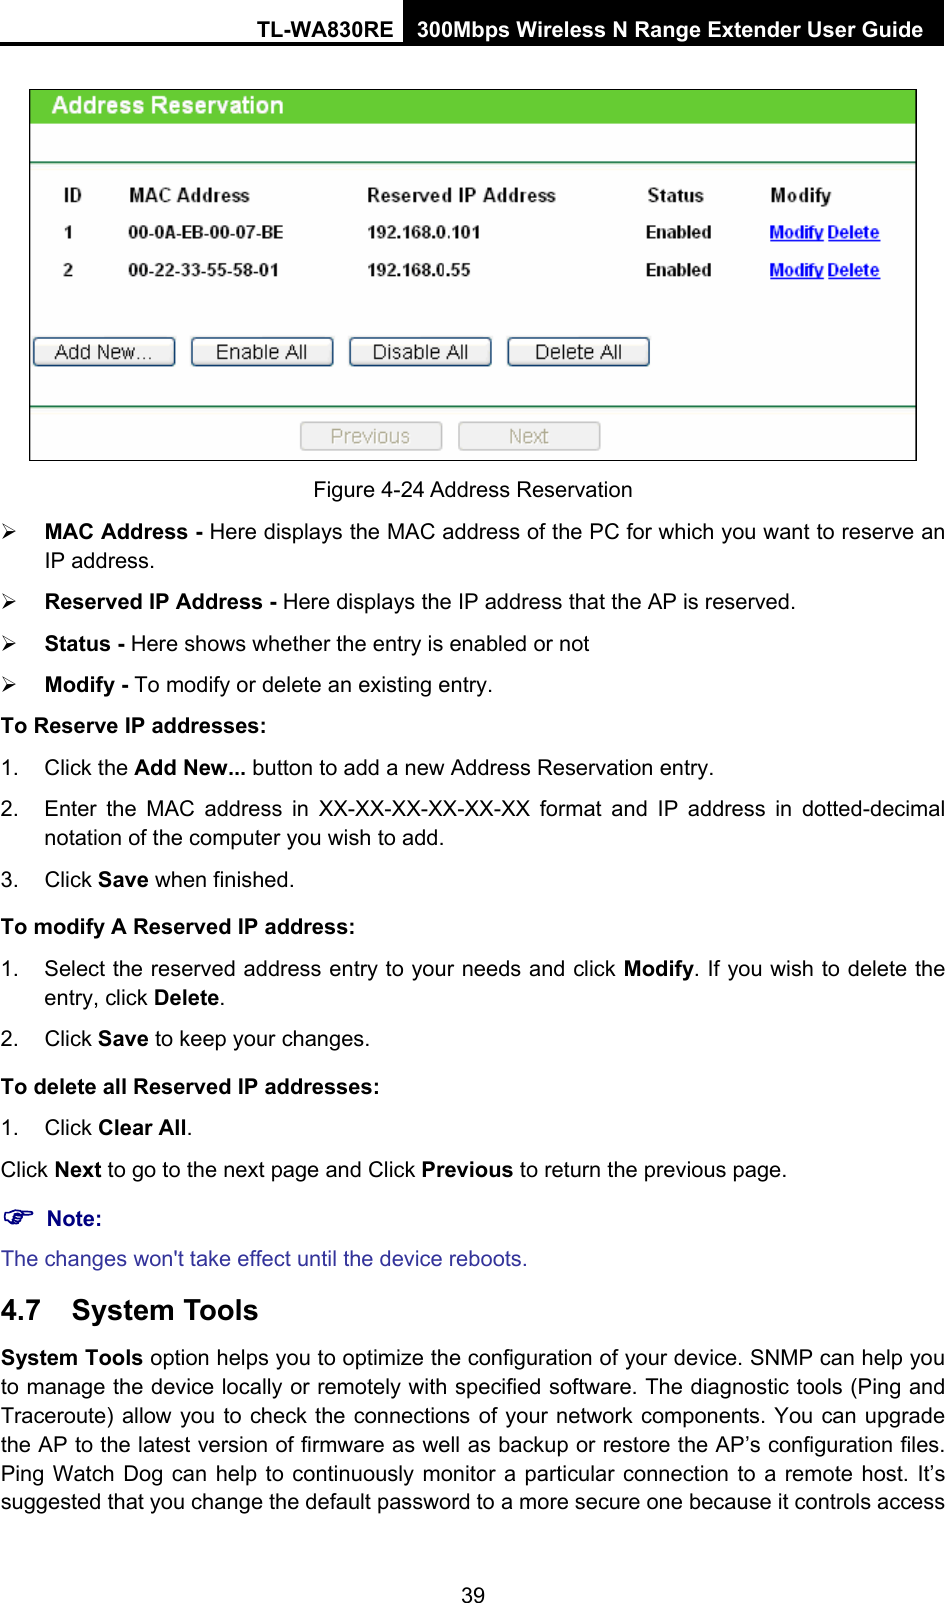 TL-WA830RE 300Mbps Wireless N Range Extender User Guide  Figure 4-24 Address Reservation ¾ MAC Address - Here displays the MAC address of the PC for which you want to reserve an IP address. ¾ Reserved IP Address - Here displays the IP address that the AP is reserved. ¾ Status - Here shows whether the entry is enabled or not   ¾ Modify - To modify or delete an existing entry.   To Reserve IP addresses: 1. Click the Add New... button to add a new Address Reservation entry. 2.  Enter the MAC address in XX-XX-XX-XX-XX-XX format and IP address in dotted-decimal notation of the computer you wish to add. 3. Click Save when finished. To modify A Reserved IP address: 1.  Select the reserved address entry to your needs and click Modify. If you wish to delete the entry, click Delete. 2. Click Save to keep your changes. To delete all Reserved IP addresses: 1. Click Clear All. Click Next to go to the next page and Click Previous to return the previous page. ) Note: The changes won&apos;t take effect until the device reboots. 4.7  System Tools System Tools option helps you to optimize the configuration of your device. SNMP can help you to manage the device locally or remotely with specified software. The diagnostic tools (Ping and Traceroute) allow you to check the connections of your network components. You can upgrade the AP to the latest version of firmware as well as backup or restore the AP’s configuration files. Ping Watch Dog can help to continuously monitor a particular connection to a remote host. It’s suggested that you change the default password to a more secure one because it controls access 39 